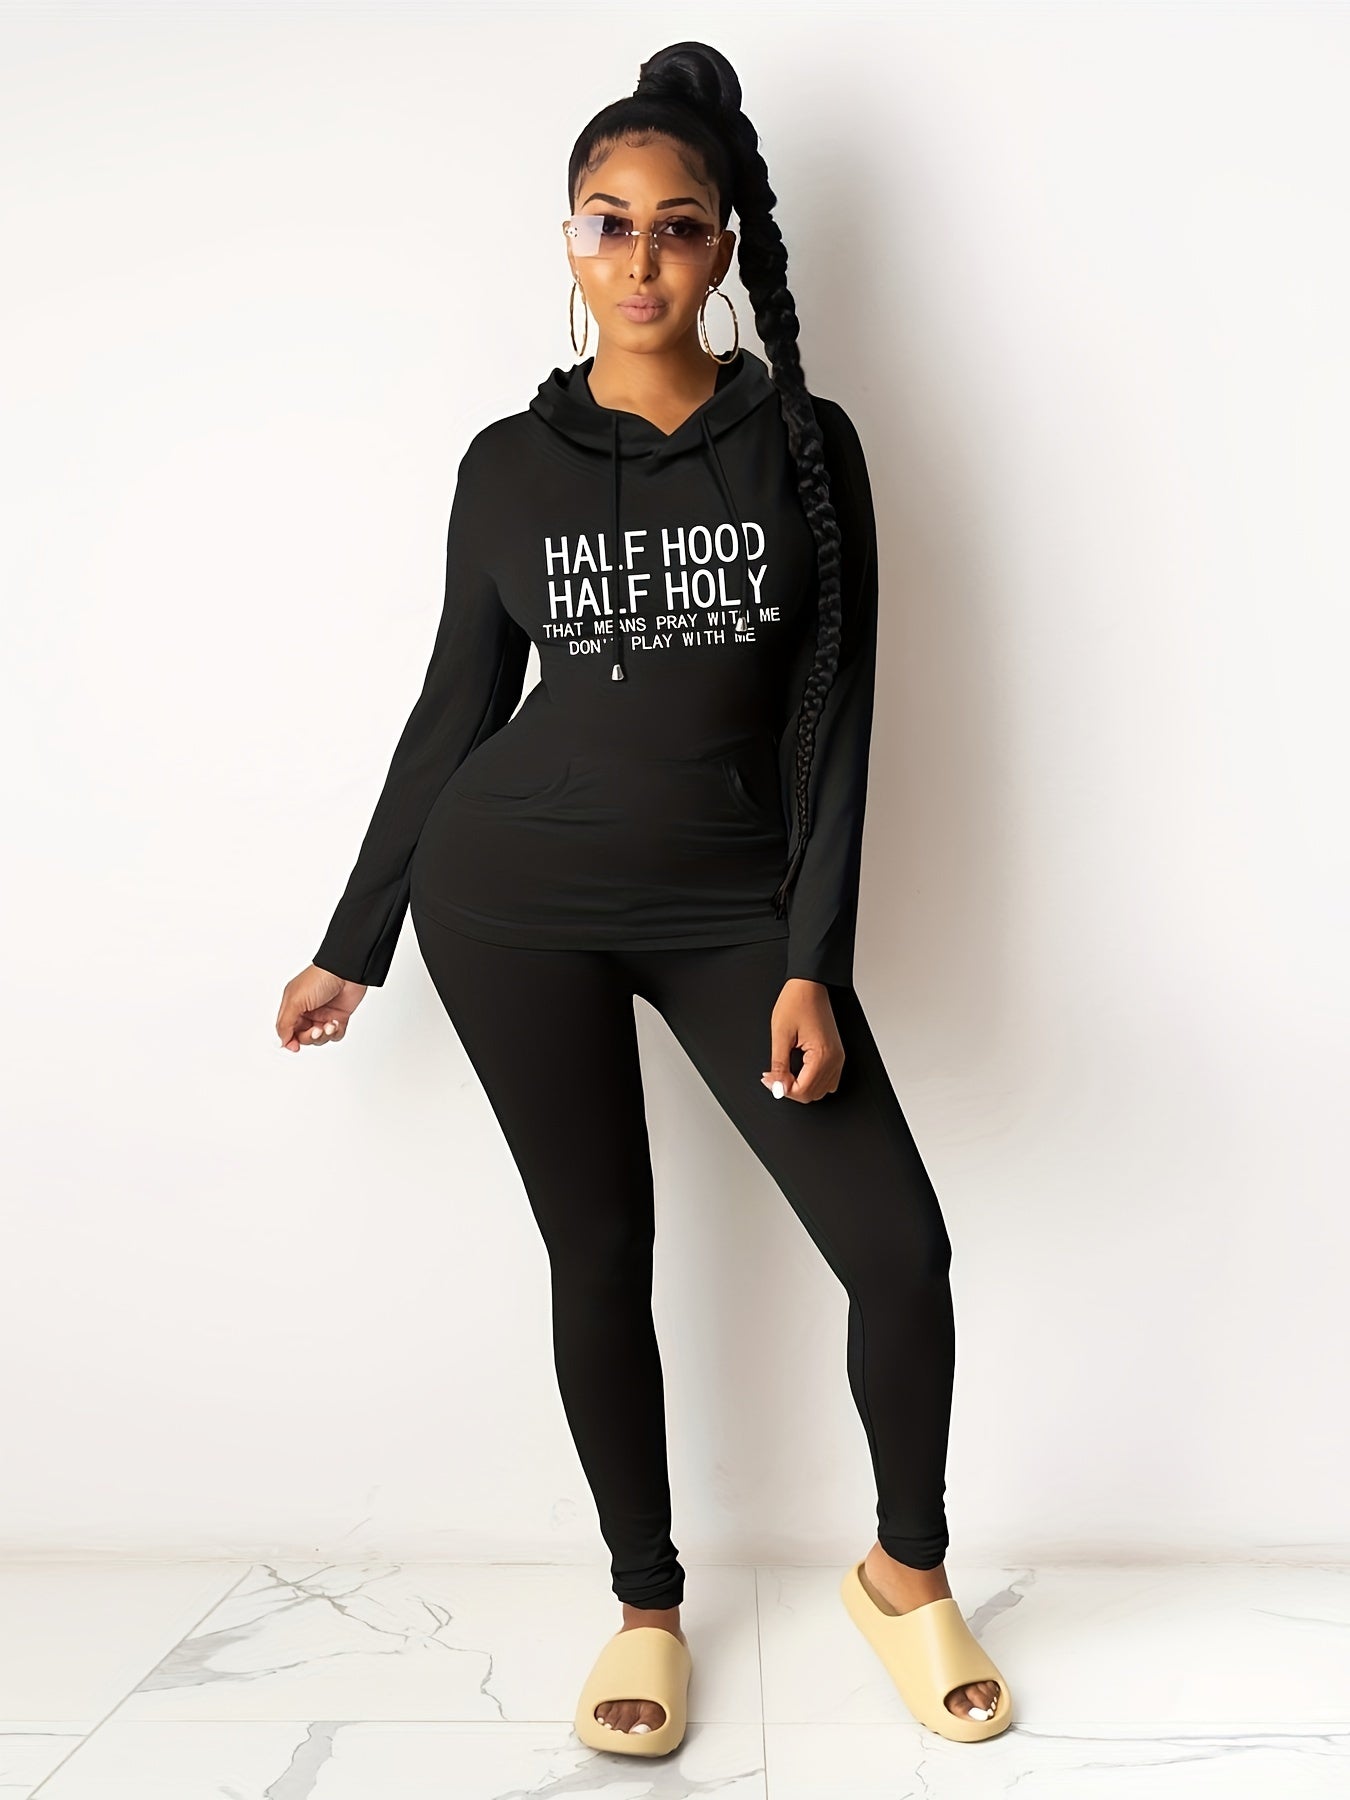 Half Hood Half Holy: Pray With Me Don't Play With Me Women's Christian Casual Outfit claimedbygoddesigns